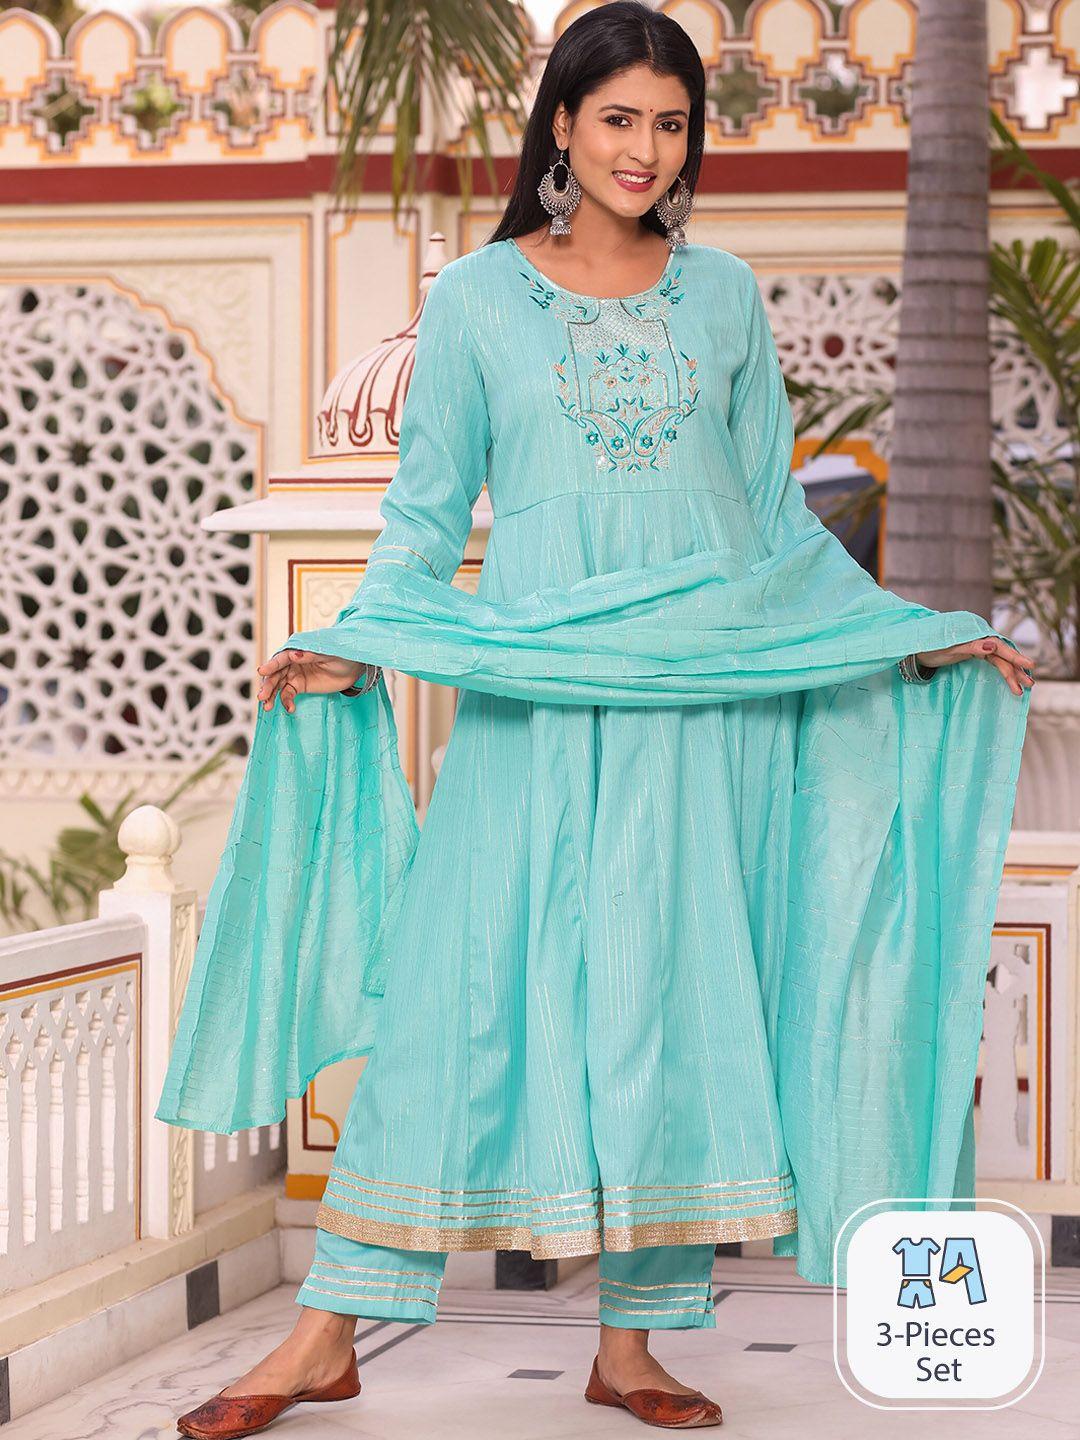 misbis women embroidered anarkali kurta with trousers & with dupatta